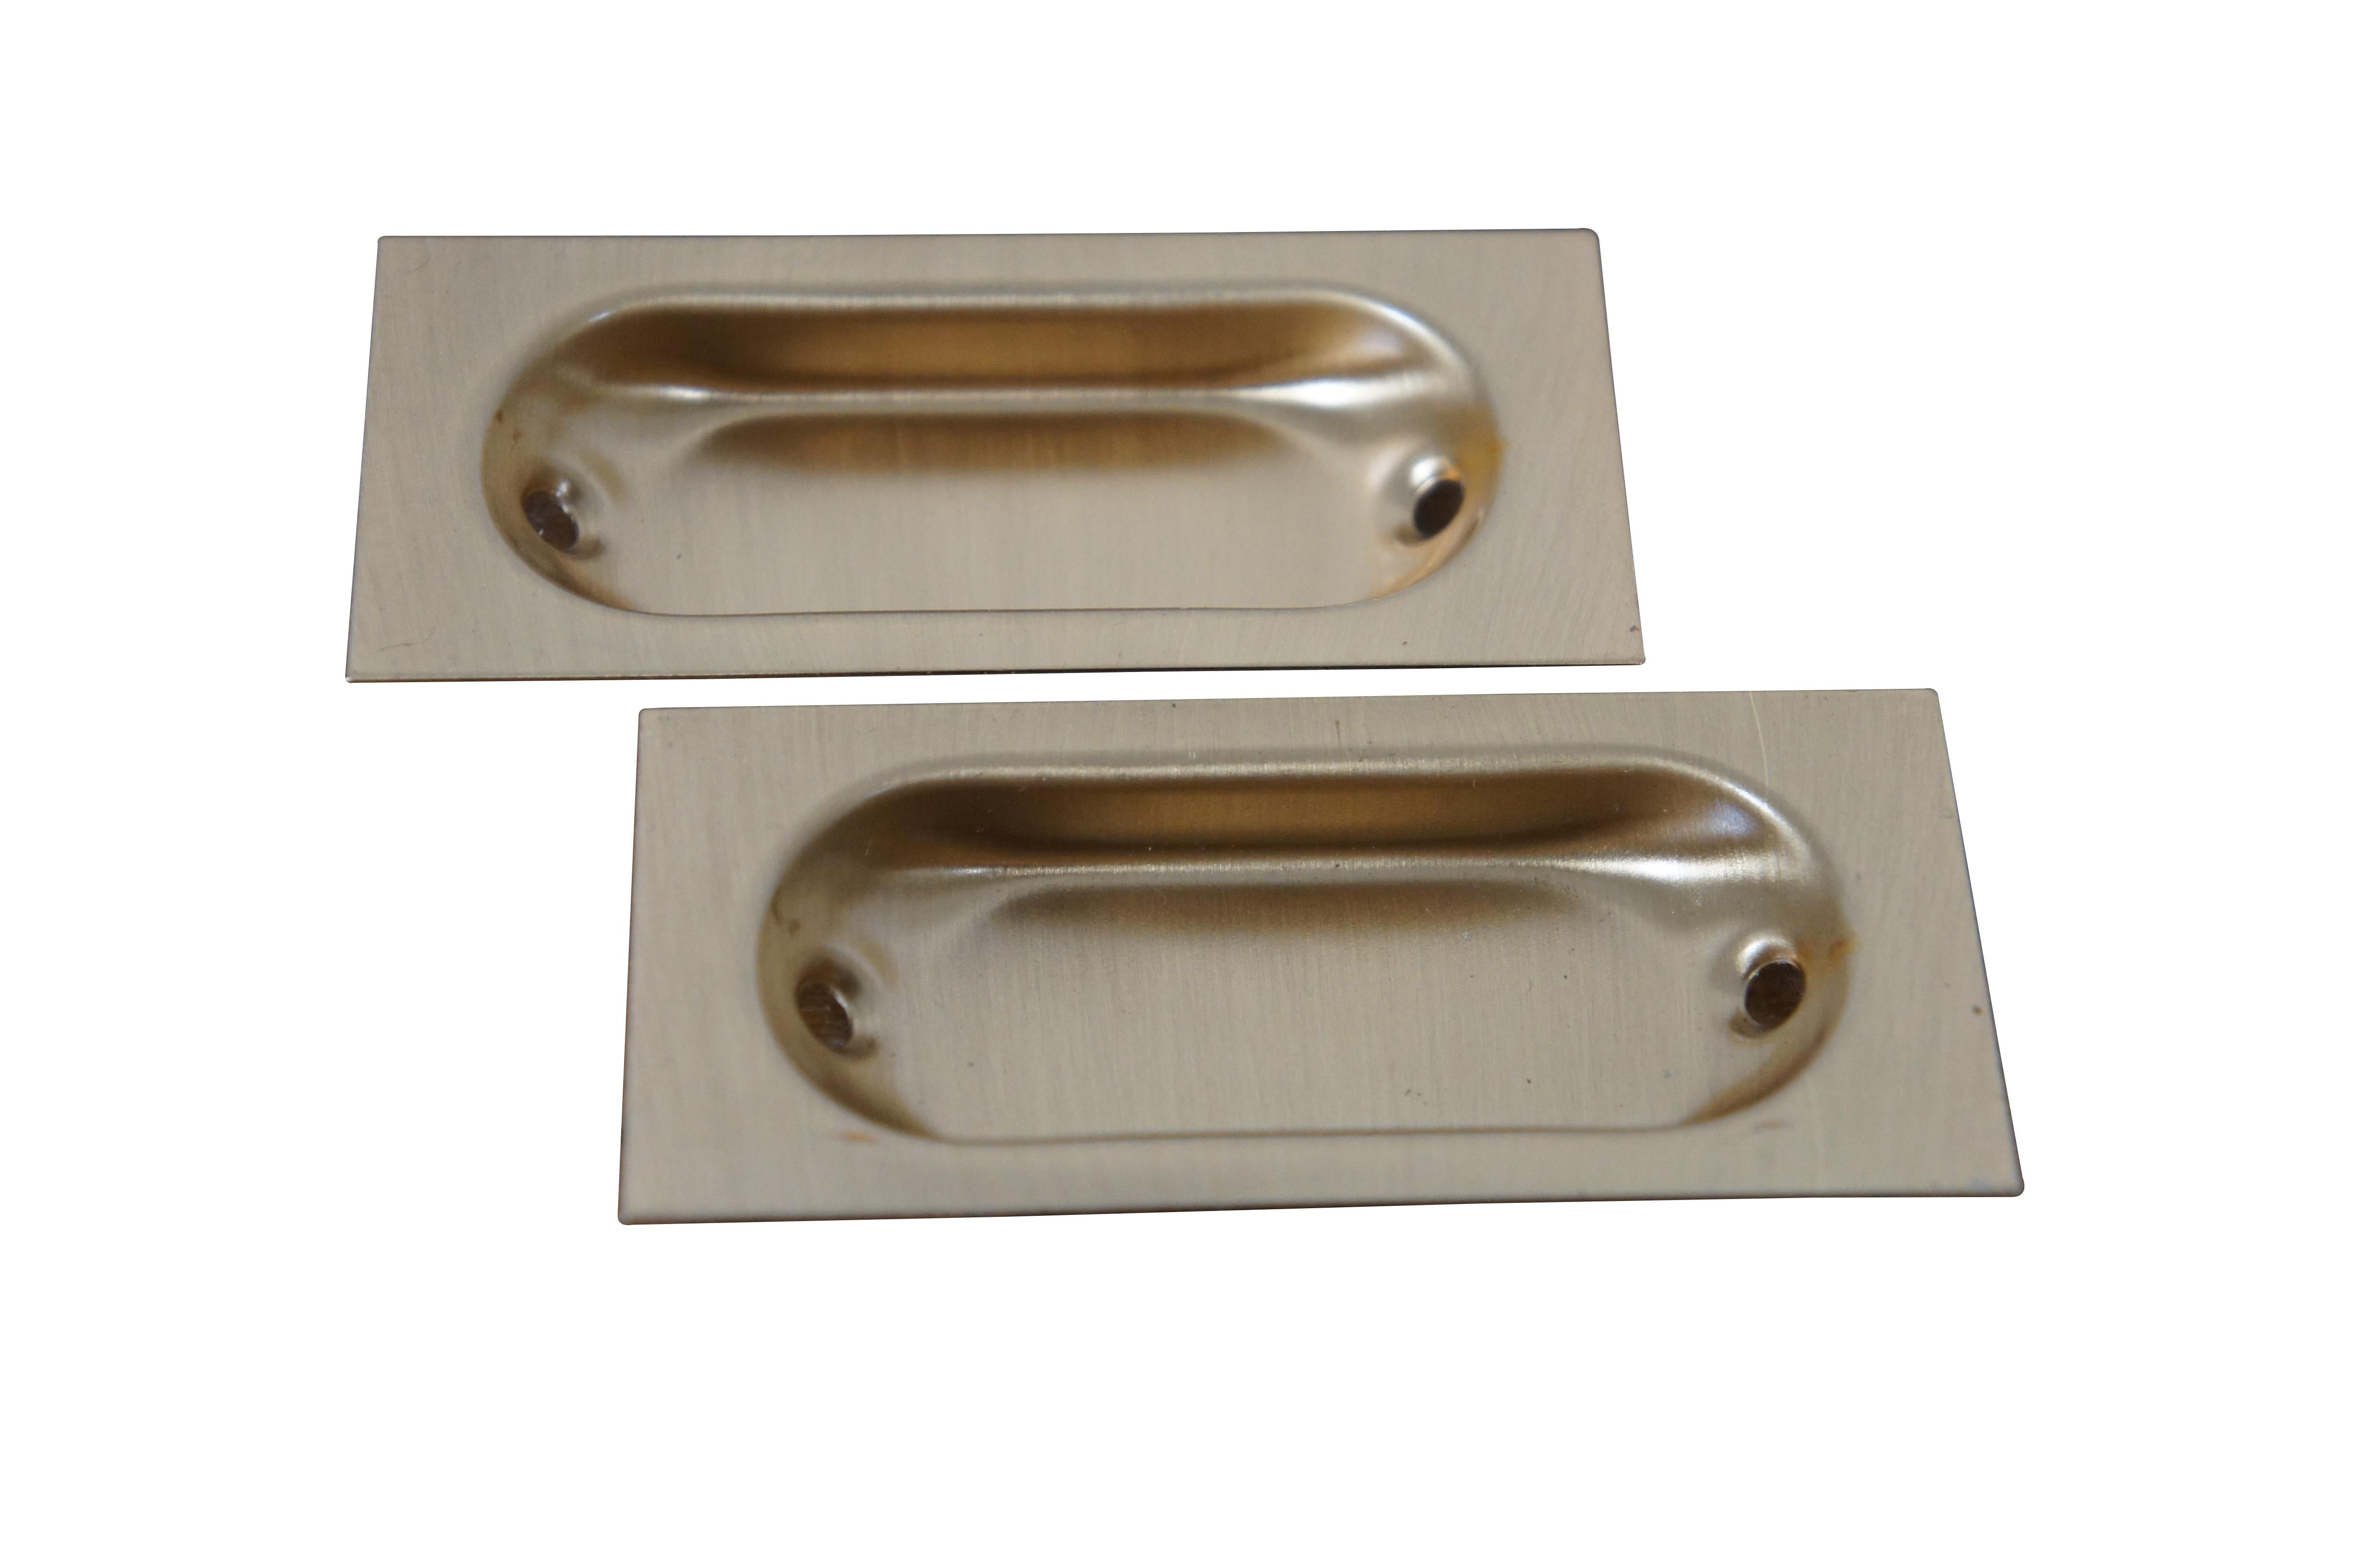 9 (Packs of 2) Available – Vintage Ajax hardware 287 Flush style drawer pulls, crafted in bronze with a rectangular shape with oval divot in a Dull Bronze finish (no. US 10).

Dimensions:
1.375